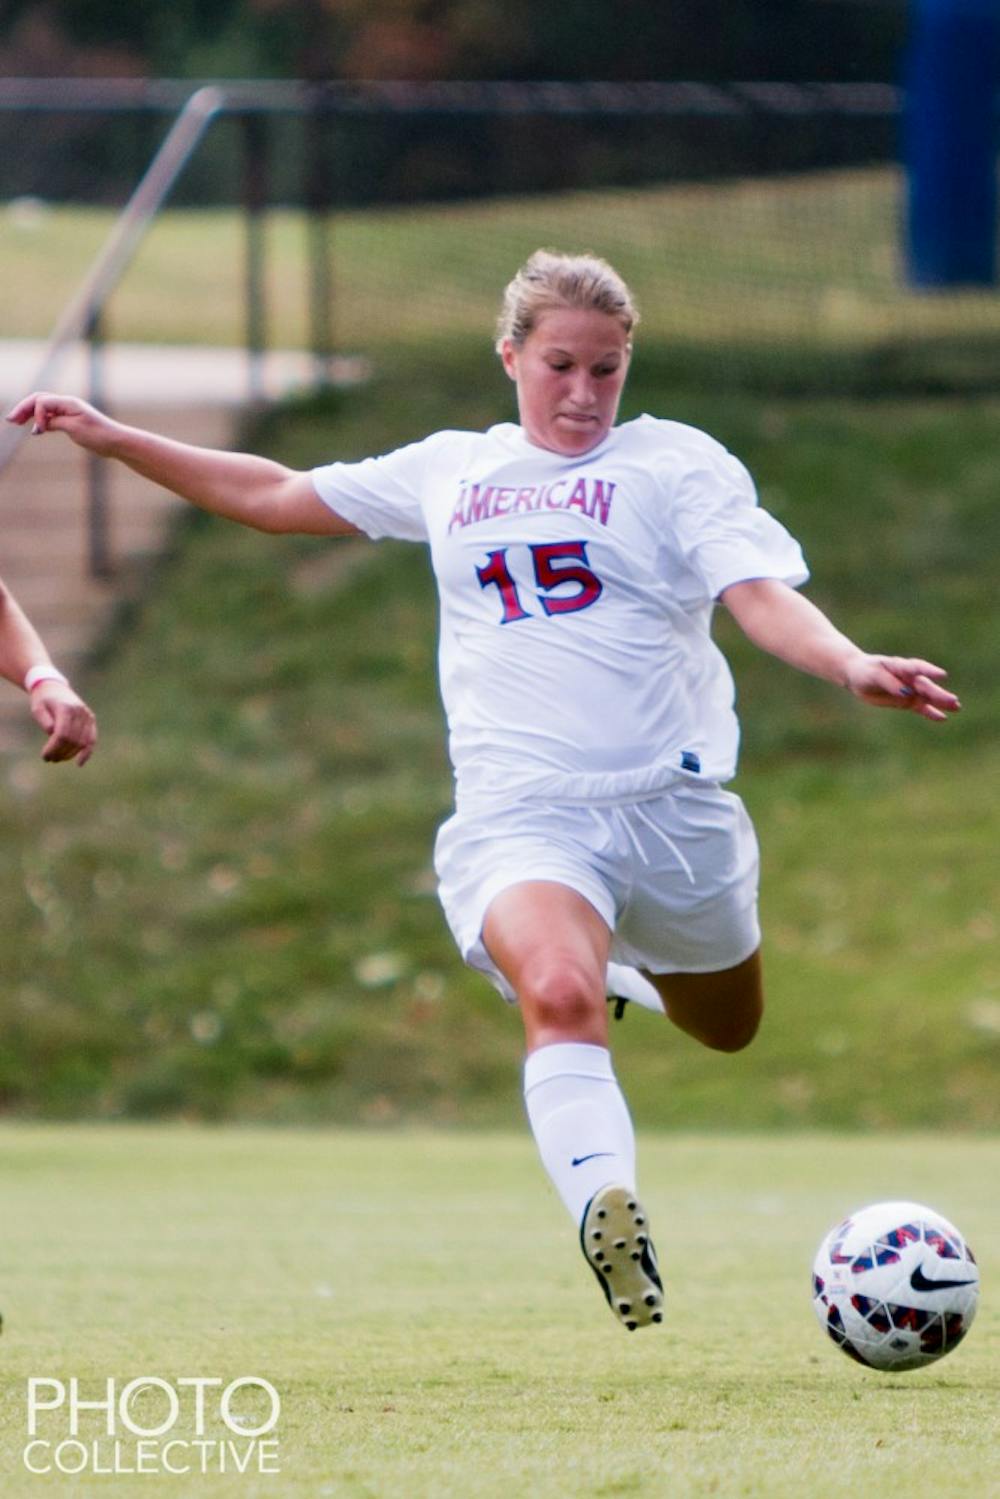 AU Women’s soccer falls short of goal in Senior Day matchup with Bucknell